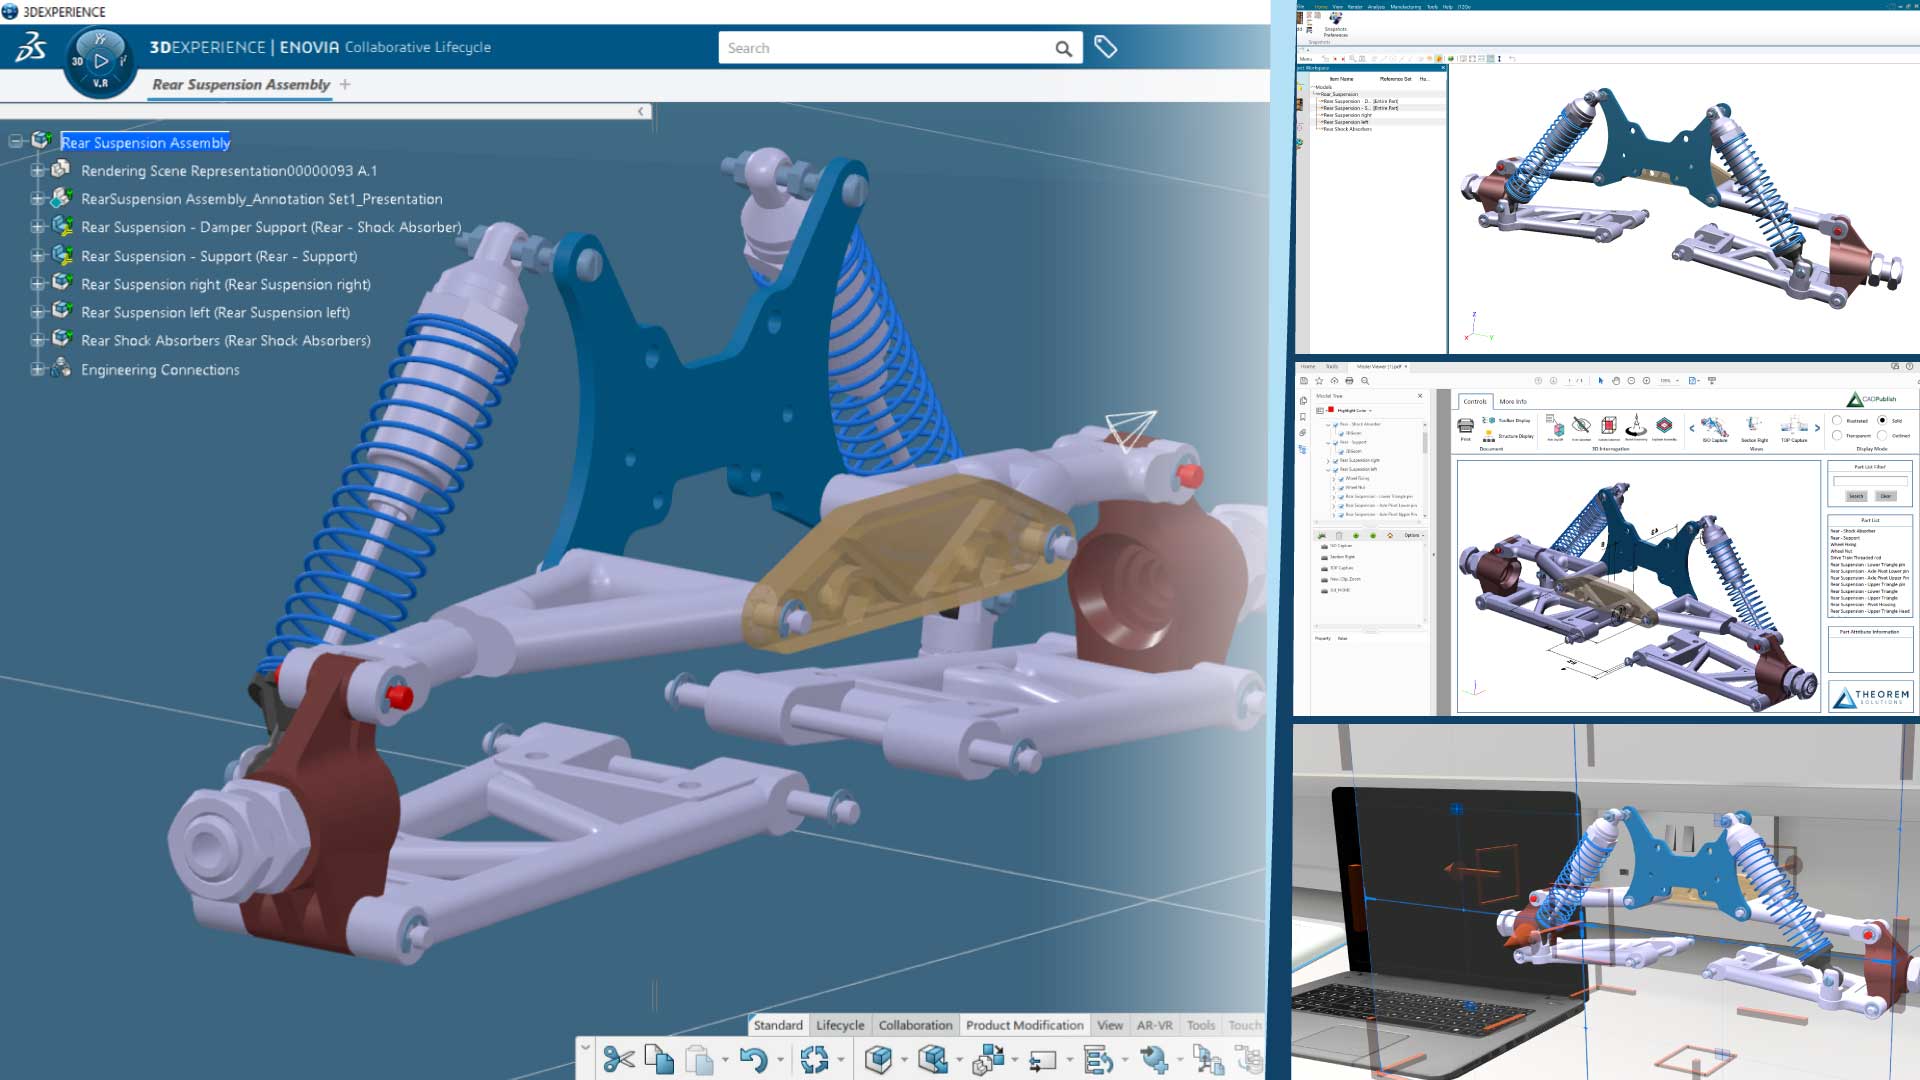 3DEXPERIENCE-Collaboration_Featured-Image_1920x1080-3